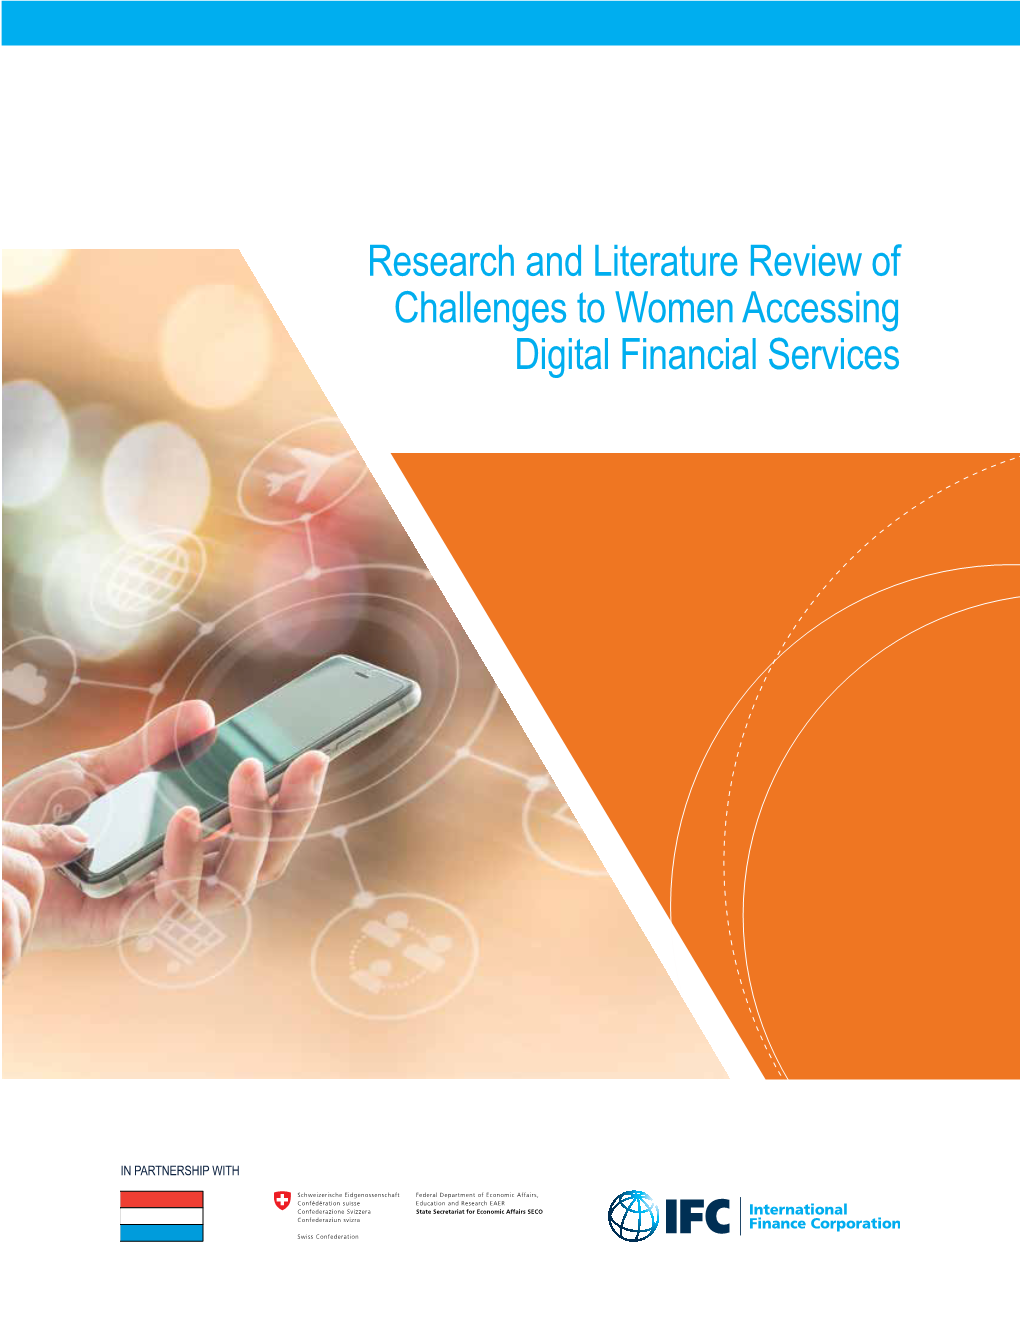 Research and Literature Review of Challenges to Women Accessing Digital Financial Services